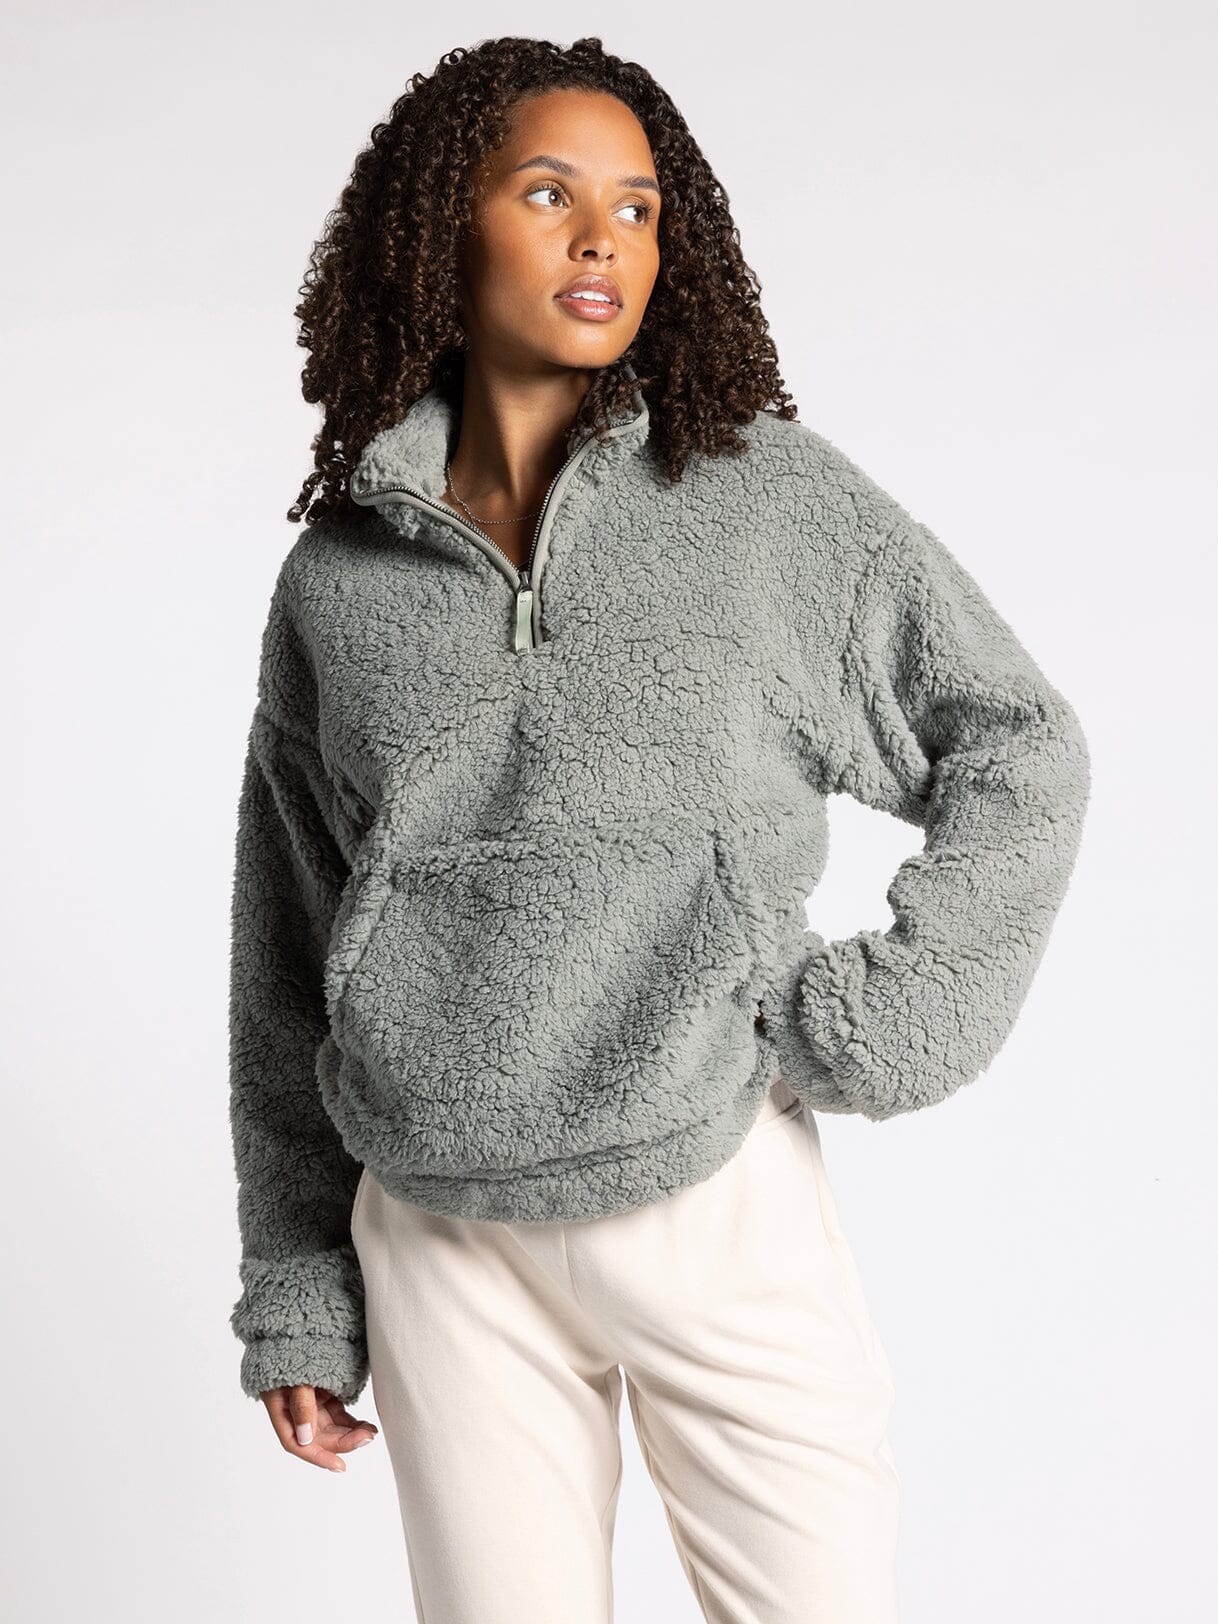 Sweaters + Tops - The Mercantile at Mill + Grain